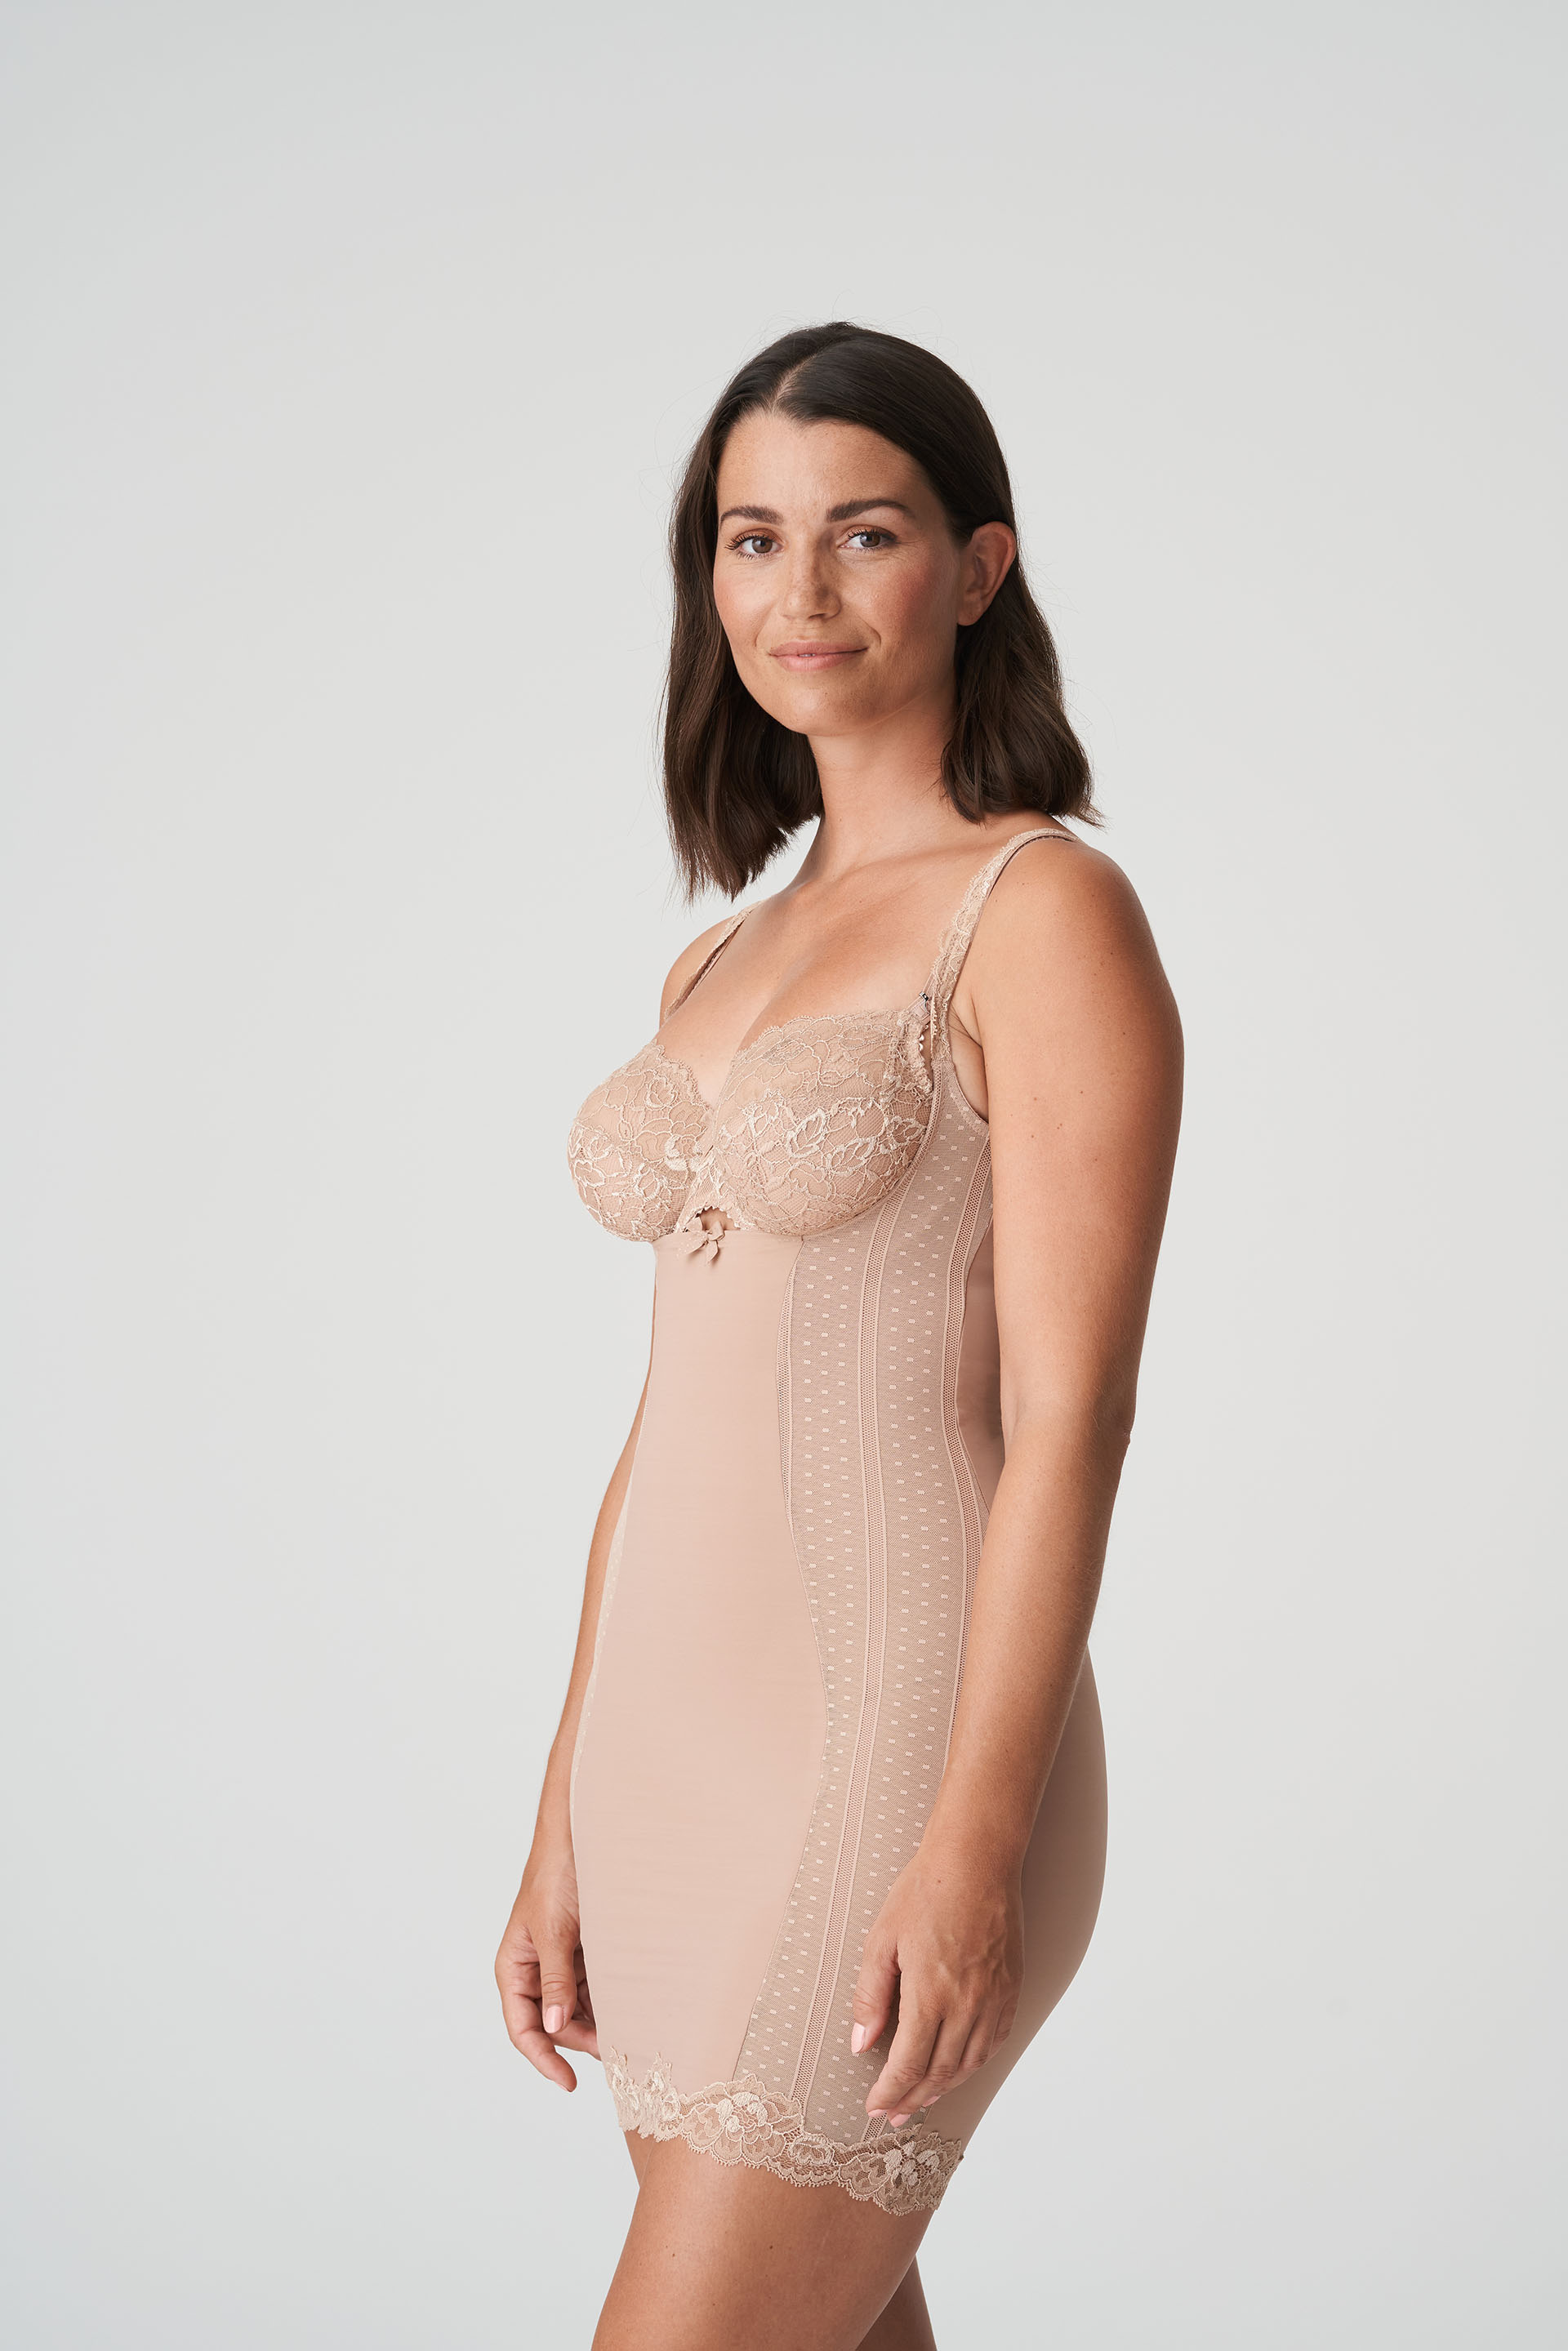 PrimaDonna COUTURE cream shapewear dress with briefs